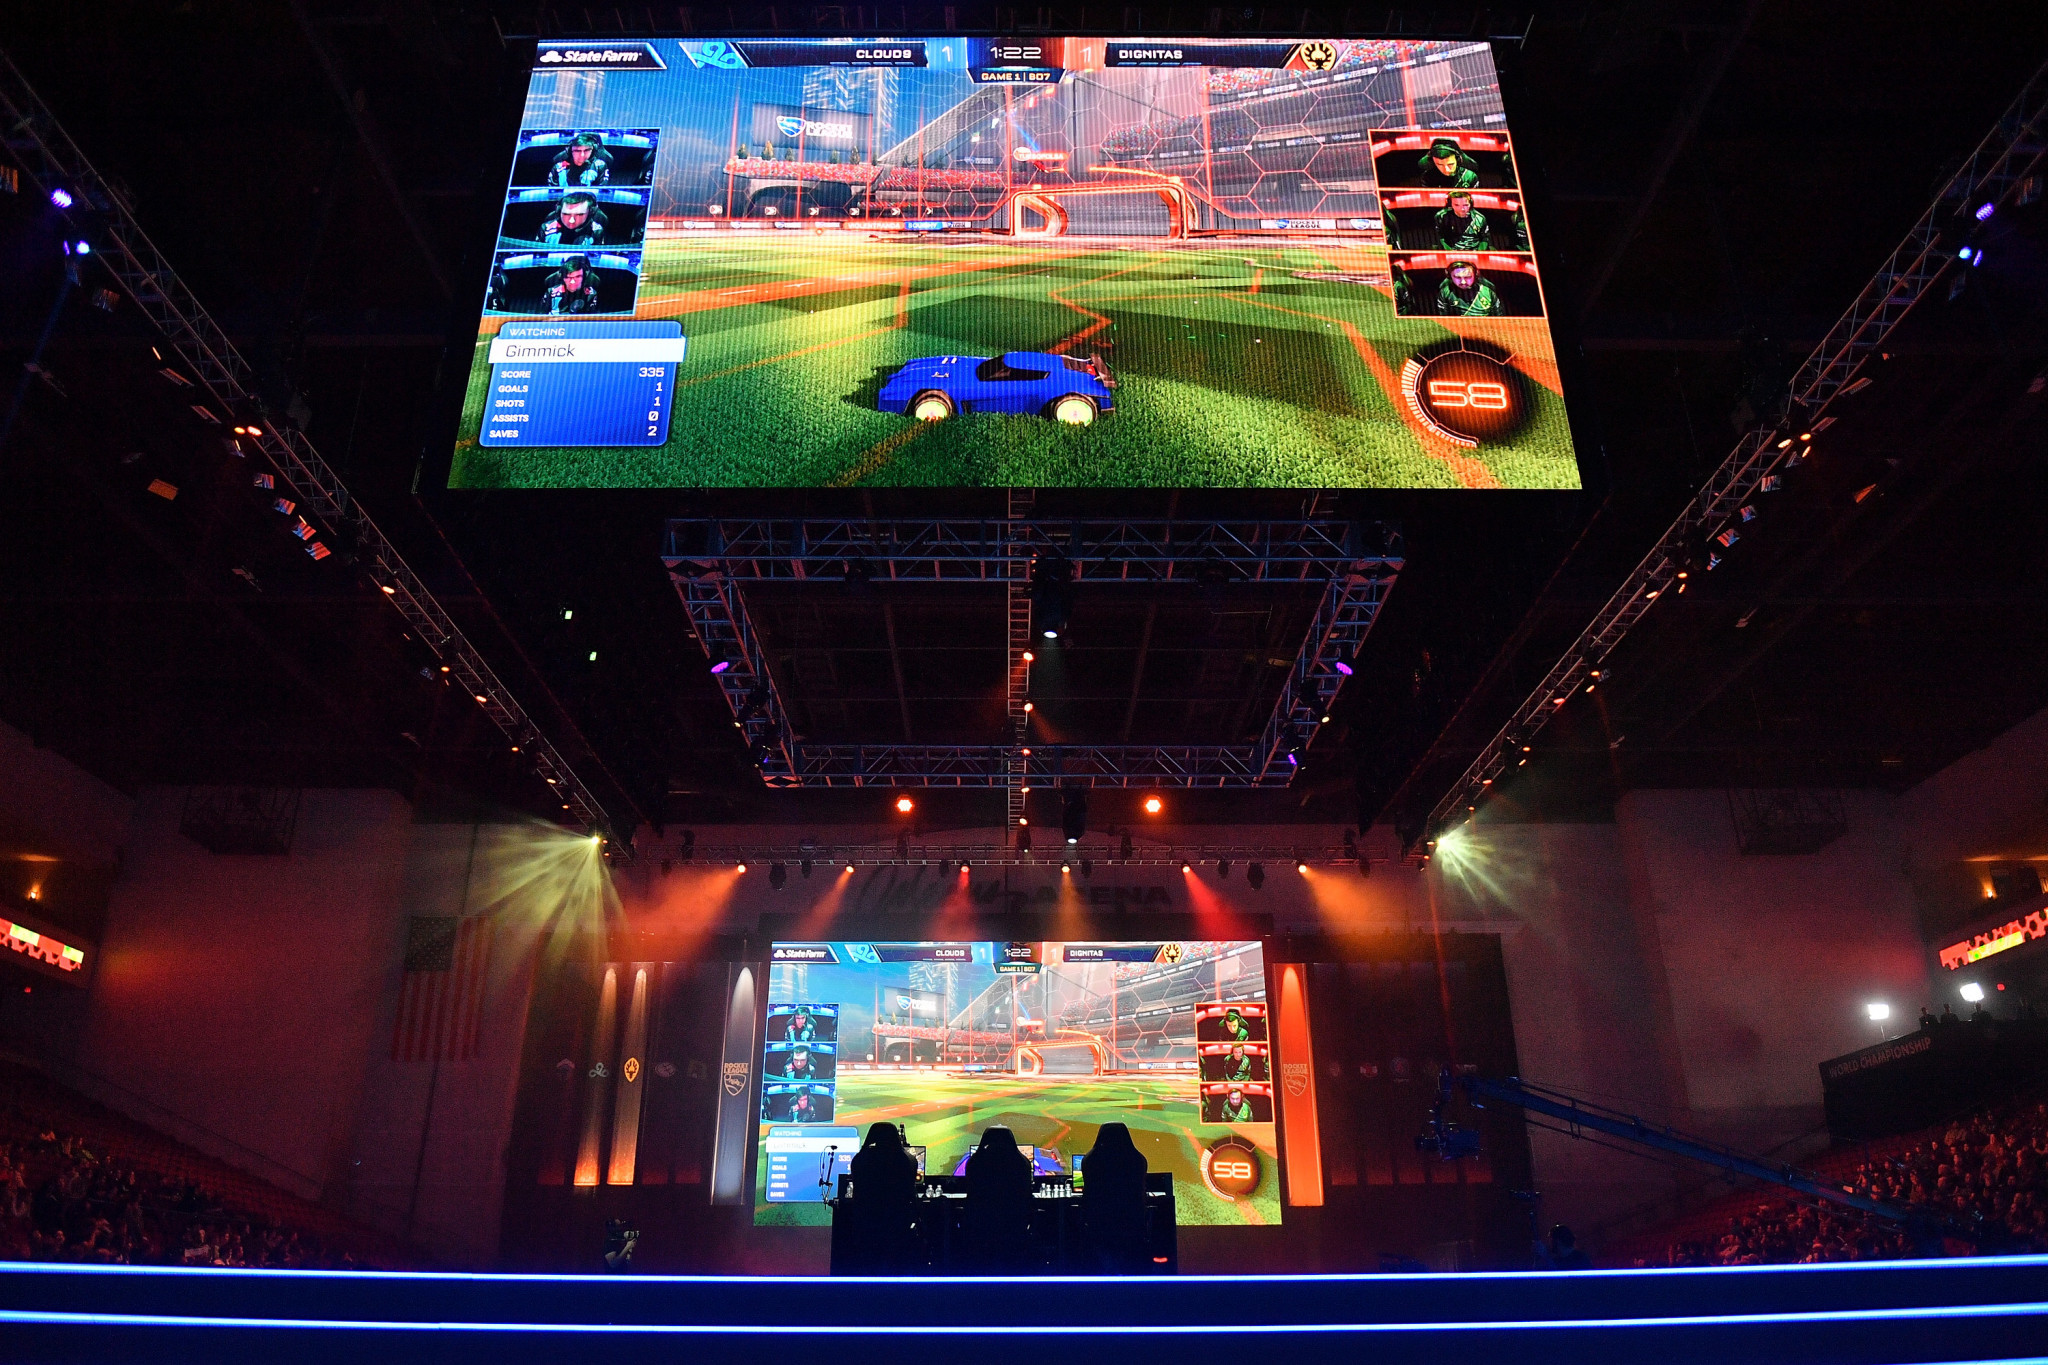 Rocket League is expected to open the Gamers8 festival ©Getty Images